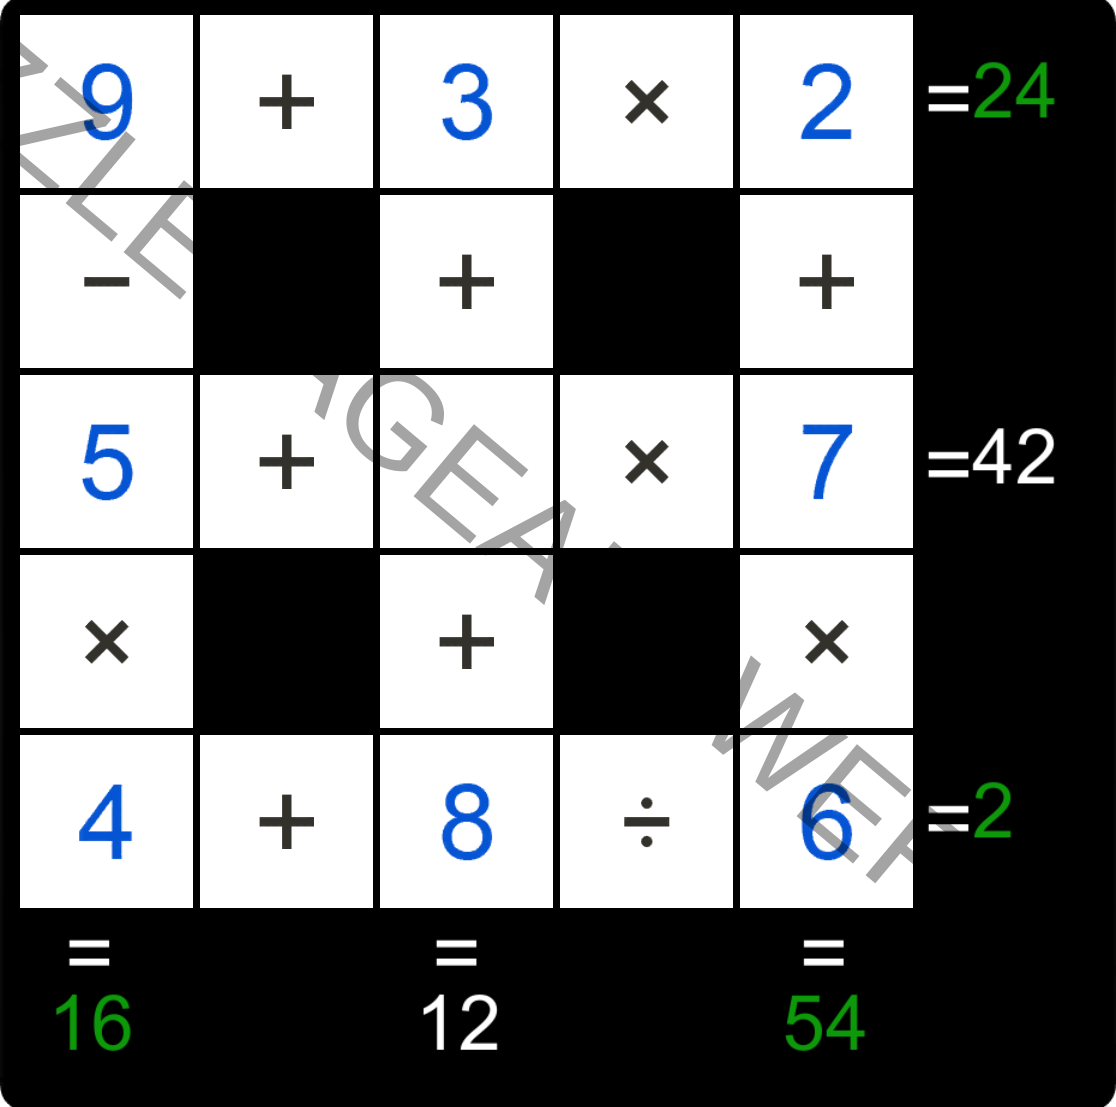 Puzzle Page Cross Sum November 25 2020 Answers Puzzle Page Answers